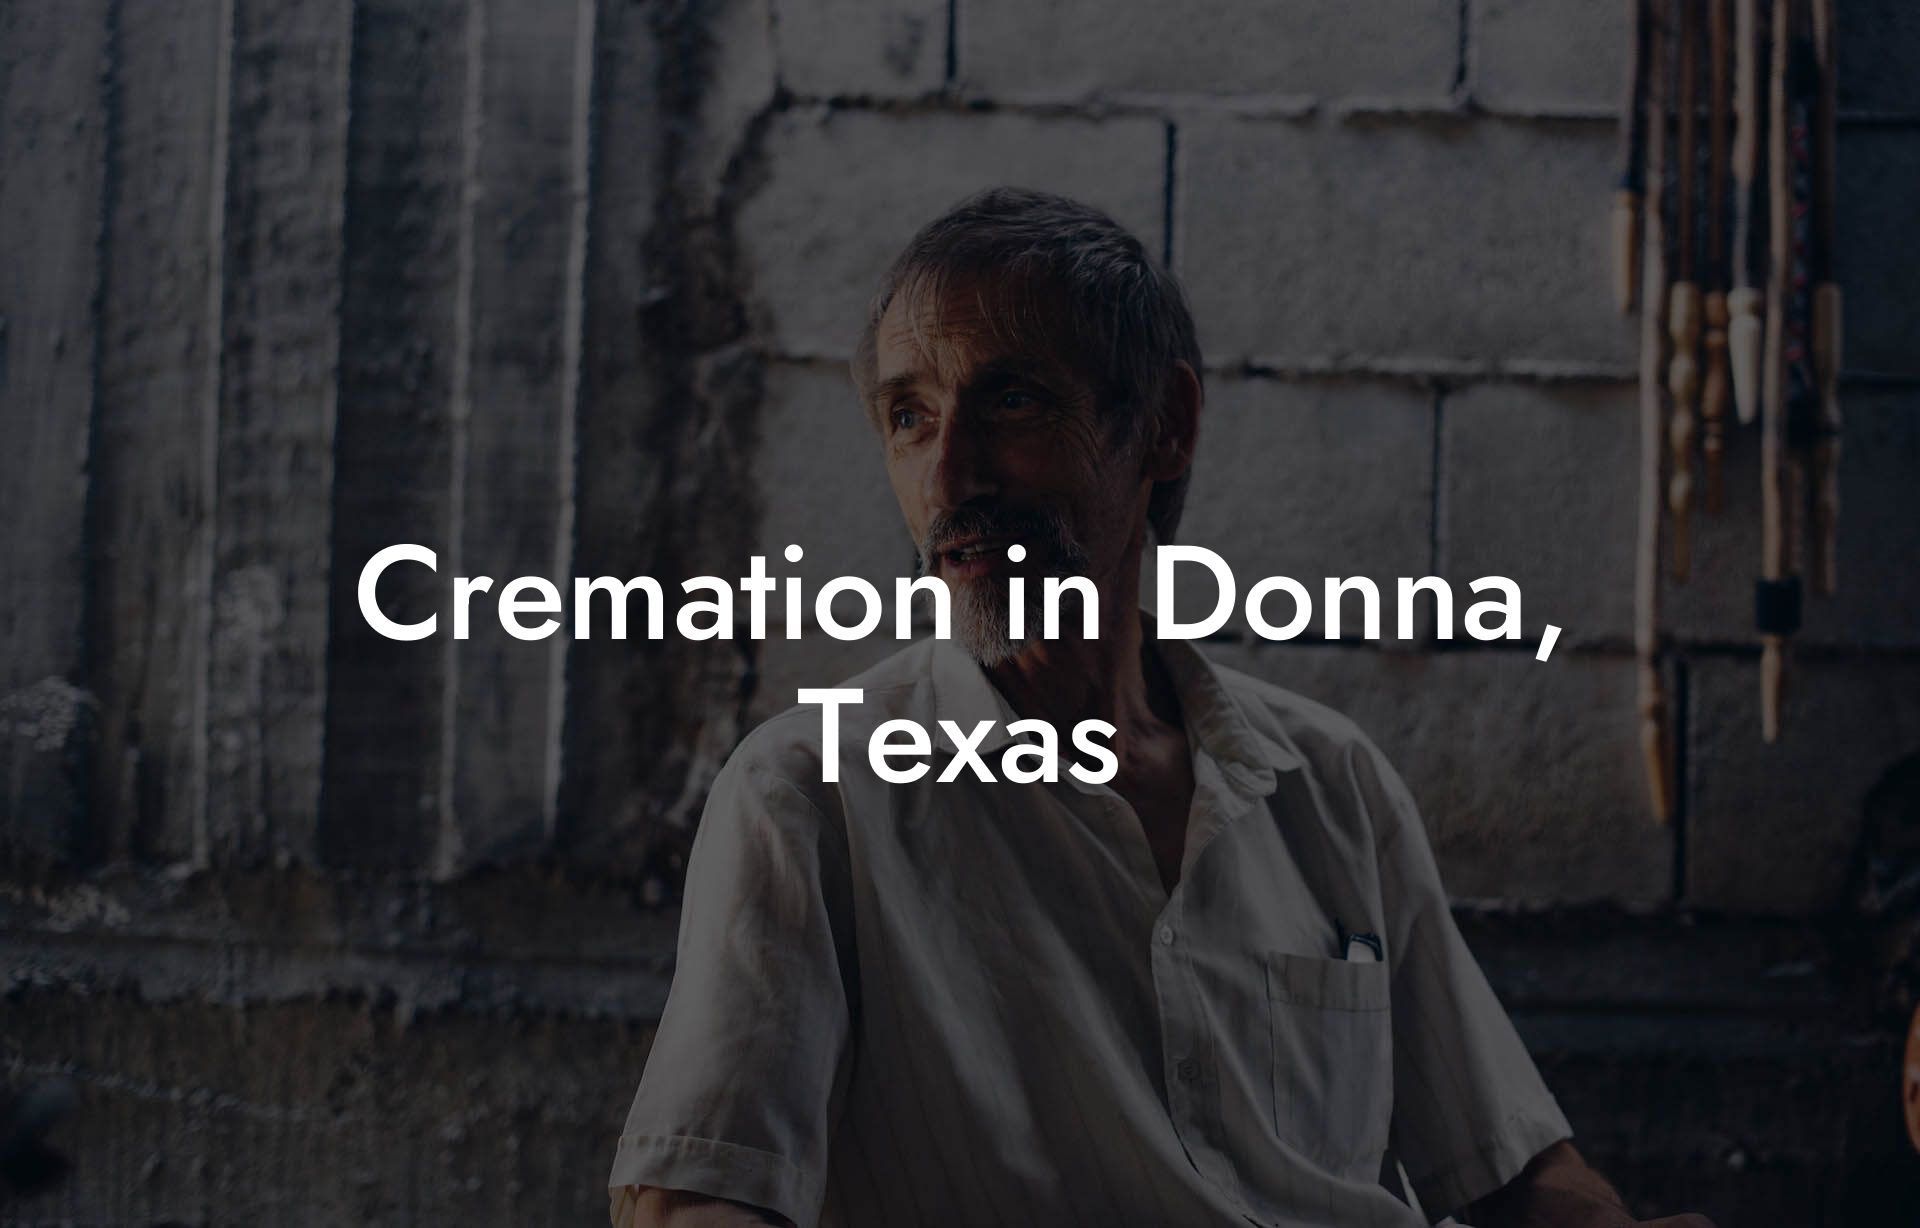 Cremation in Donna, Texas